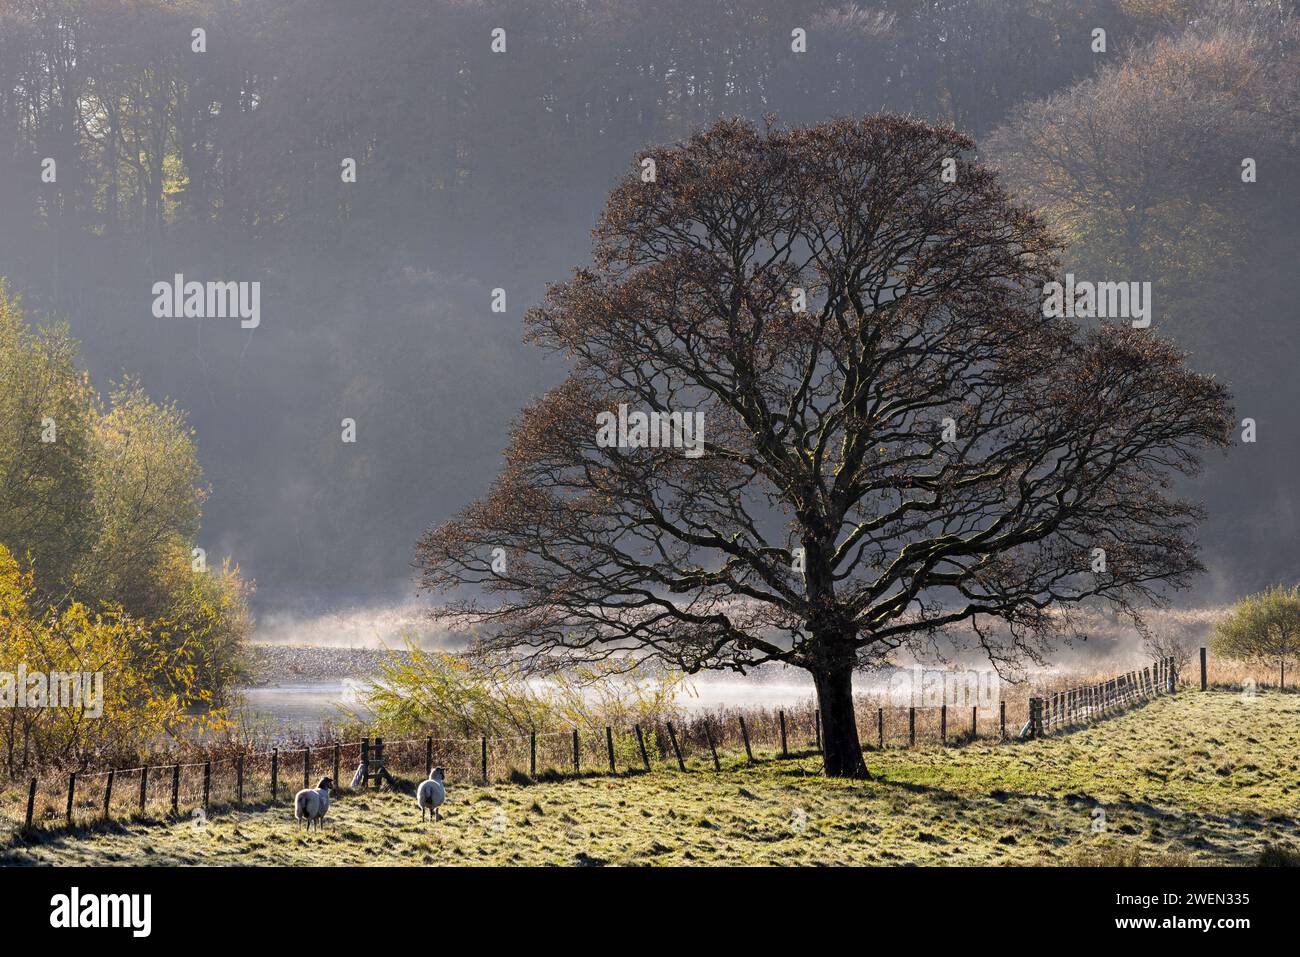 A tree growing on the banks of the River Wharfe, in the Yorkshire Dales National Park, UK Stock Photo